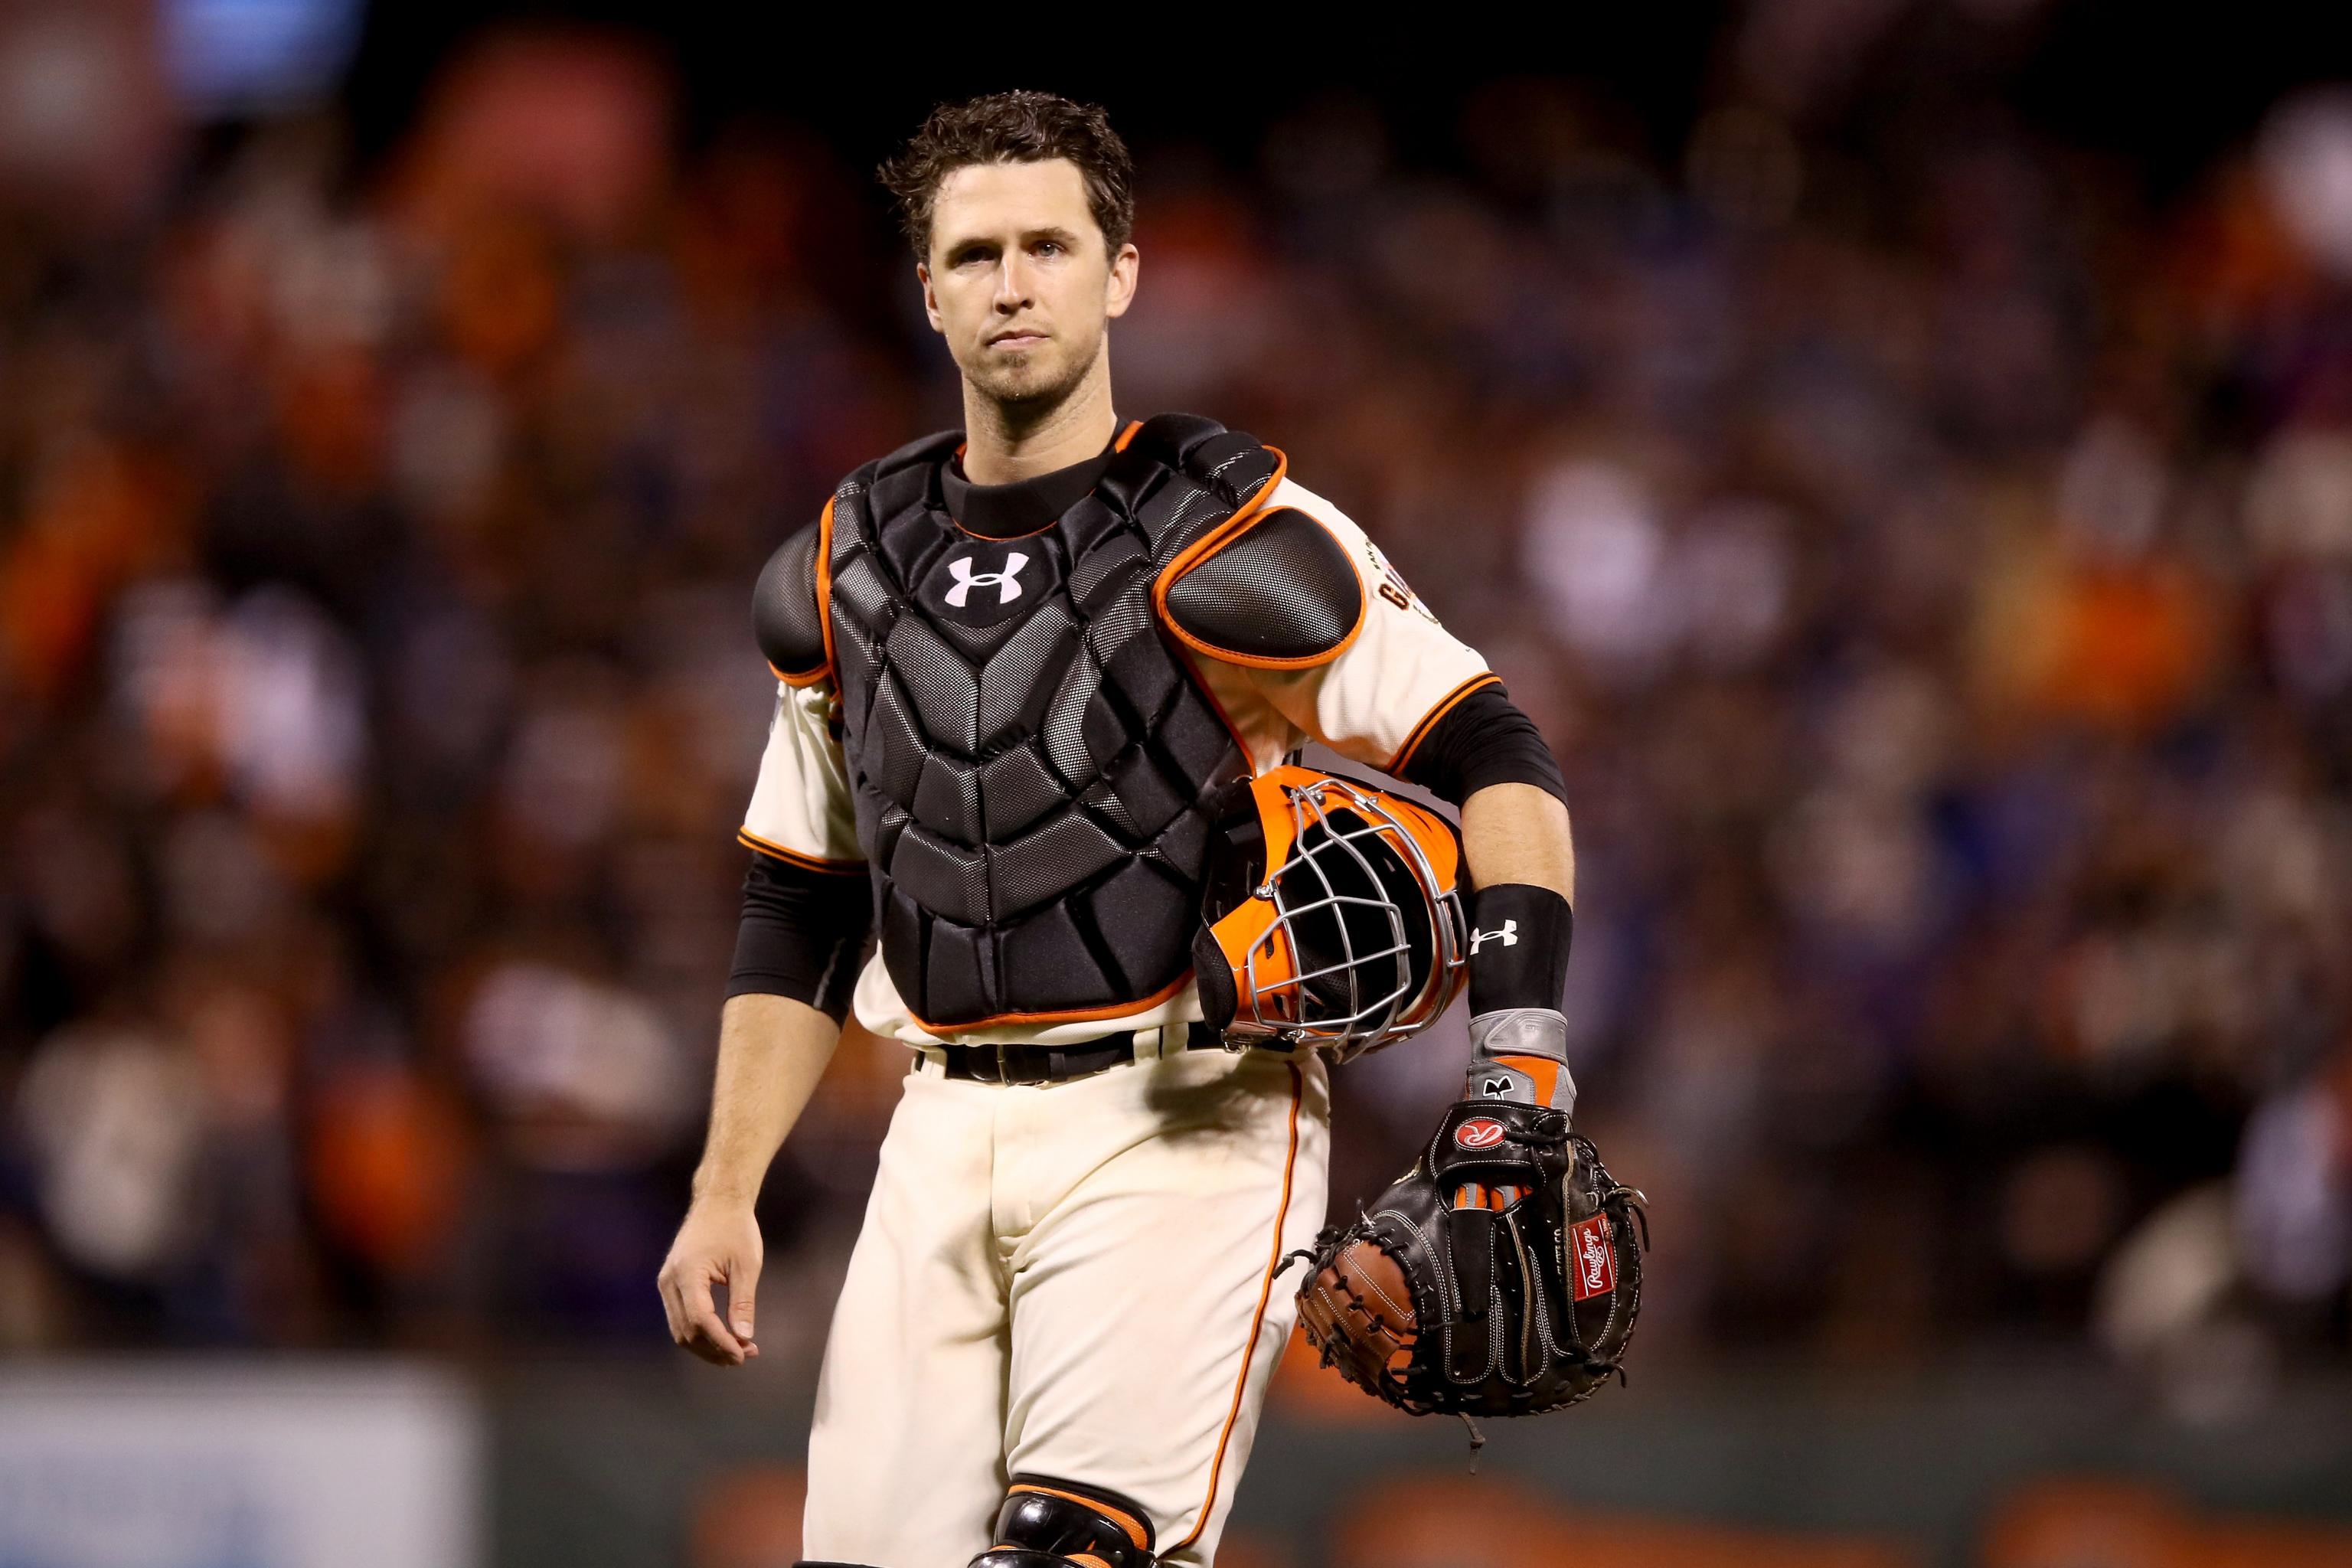 Buster Posey 2021 Highlights 